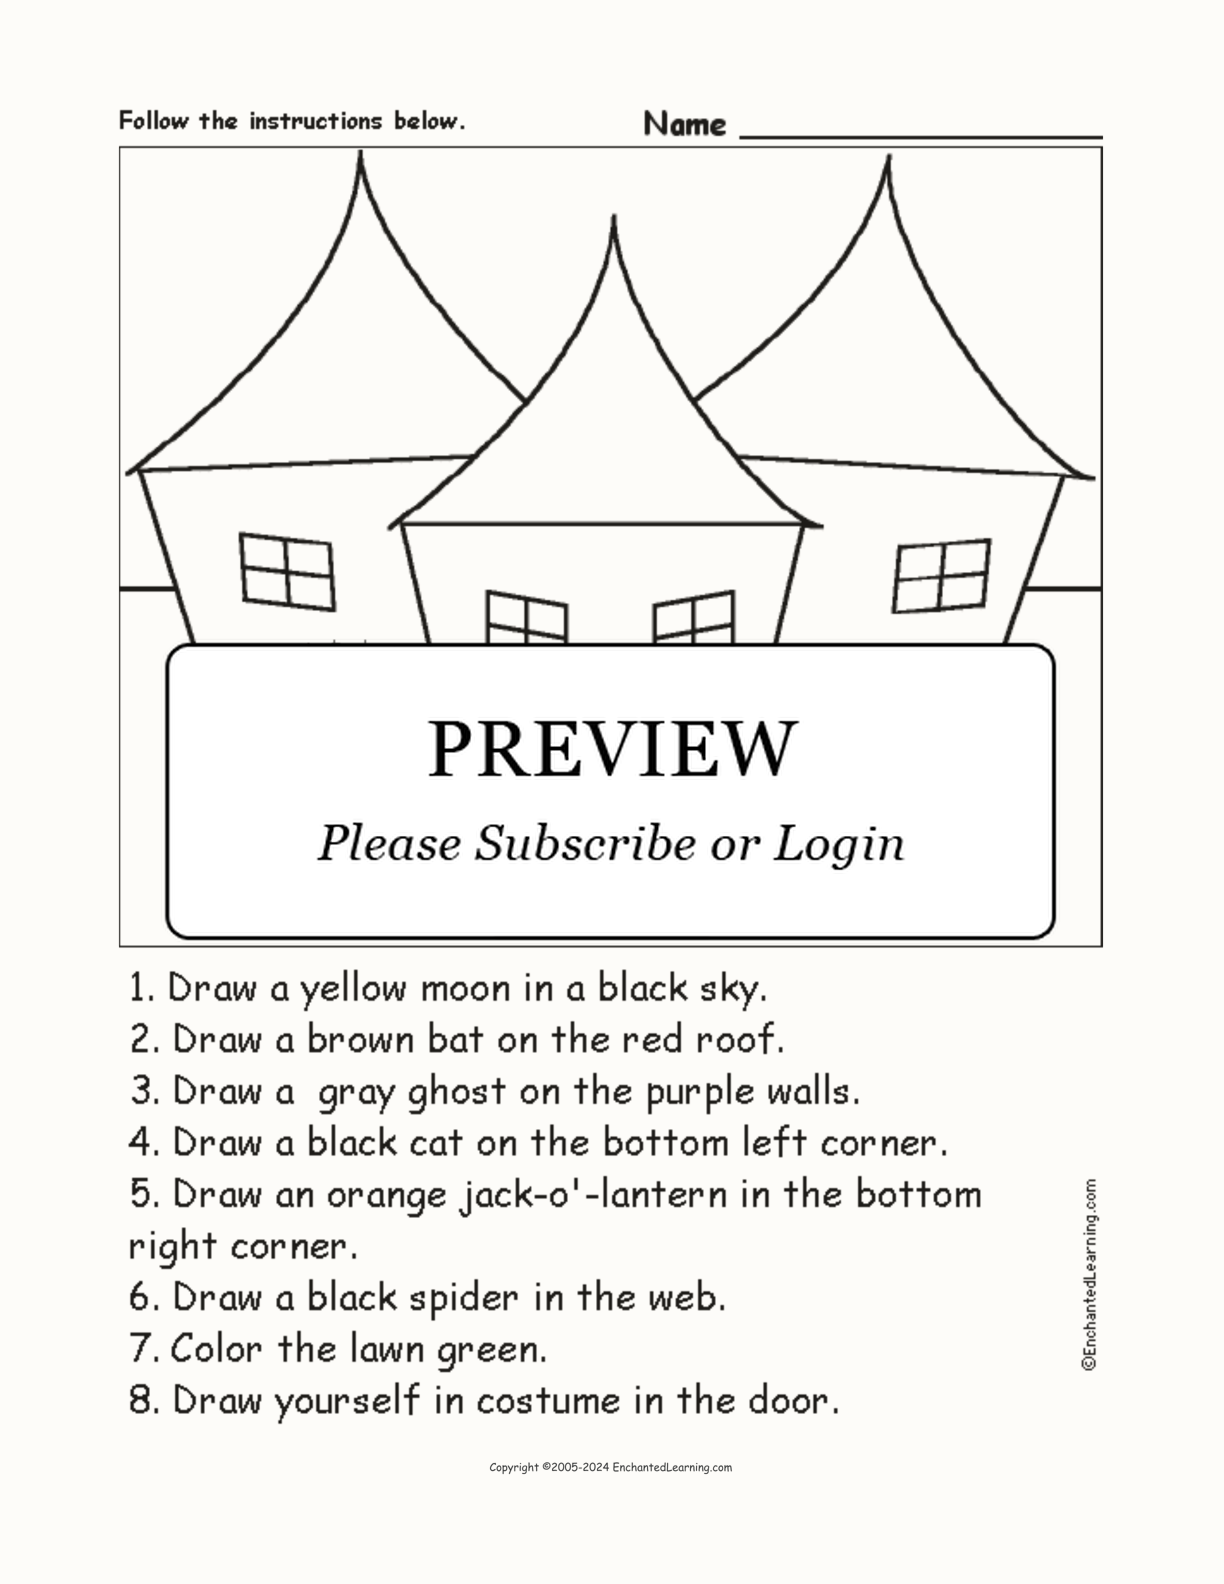 Halloween - Follow the Instructions interactive worksheet page 1